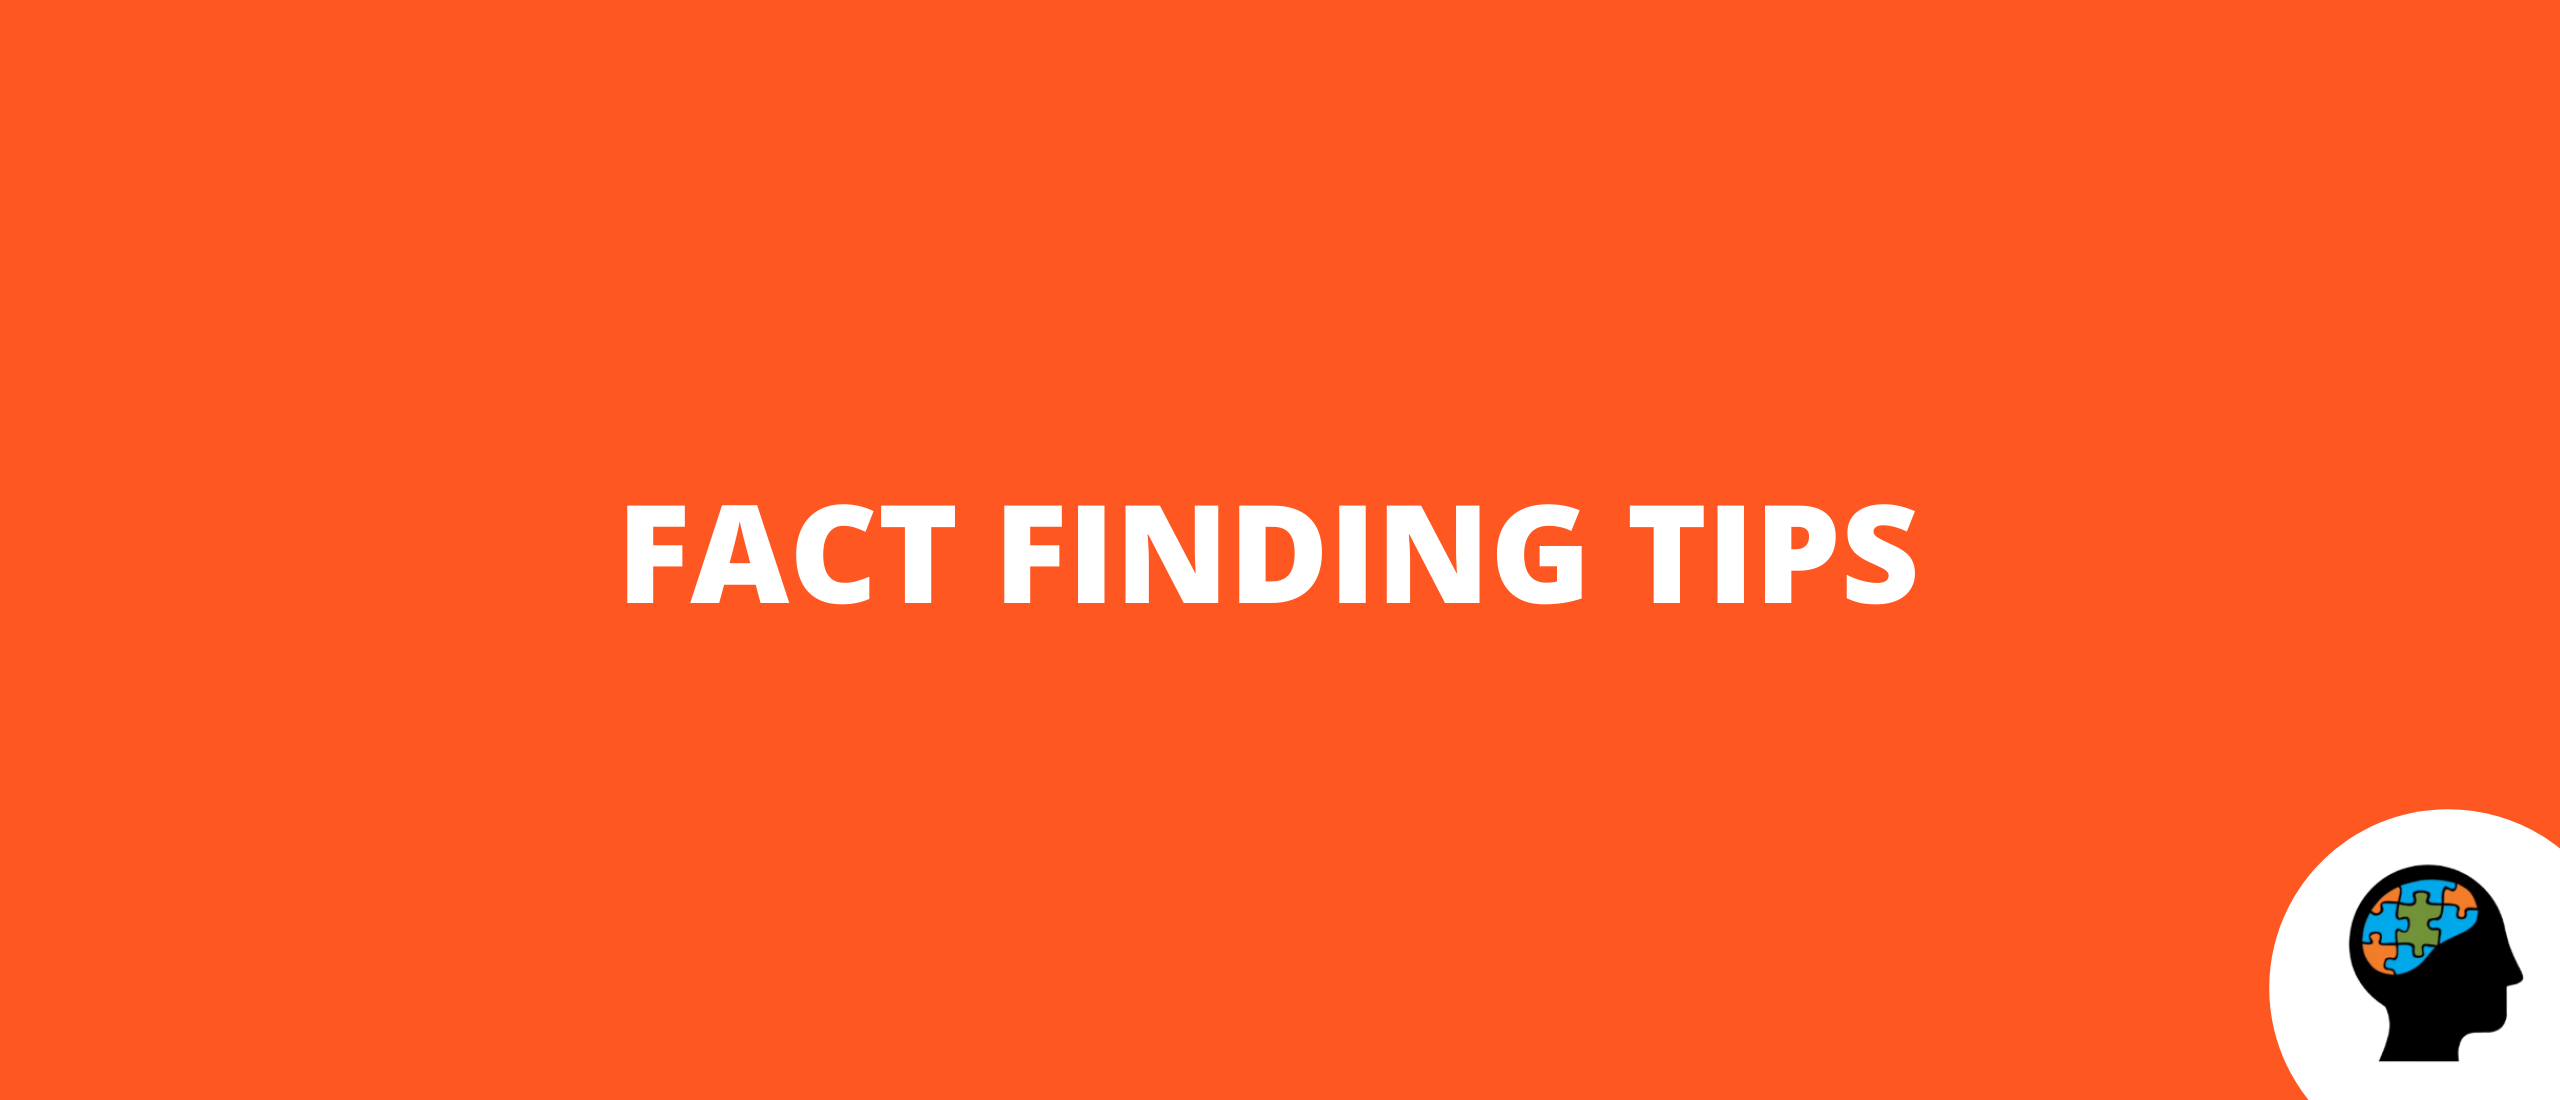 Fact finding tips